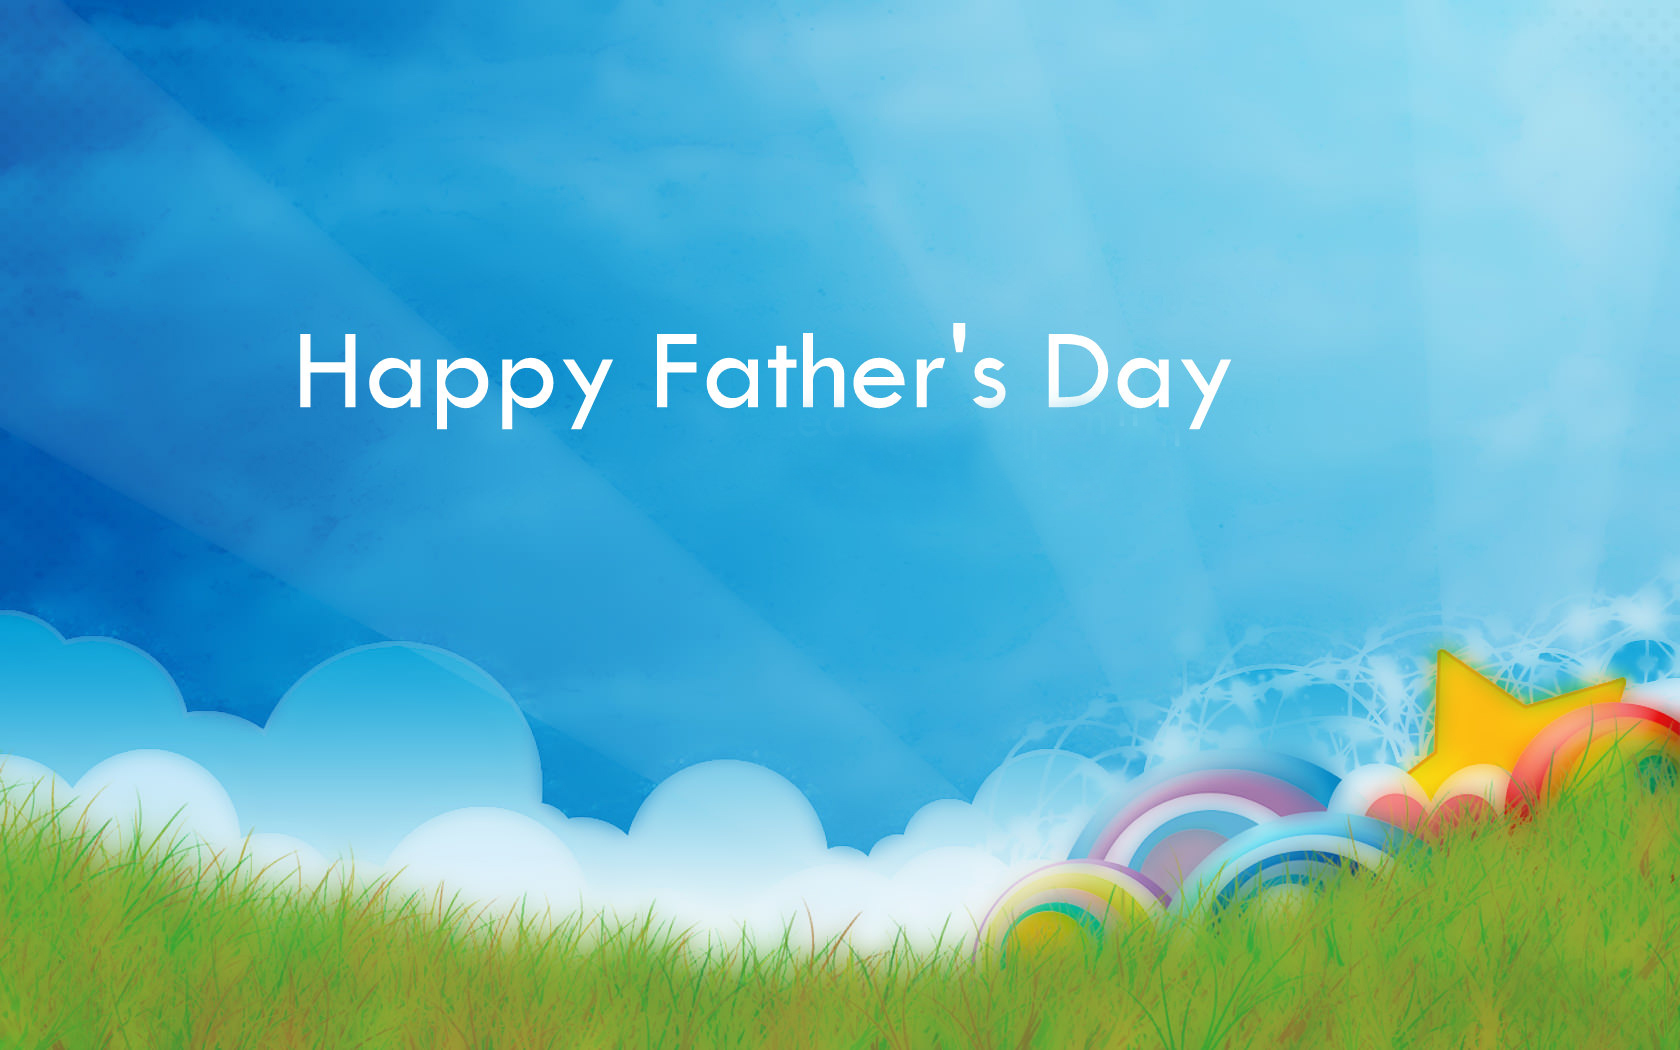 Happy Father's Day Wallpapers download free - PixelsTalk.Net